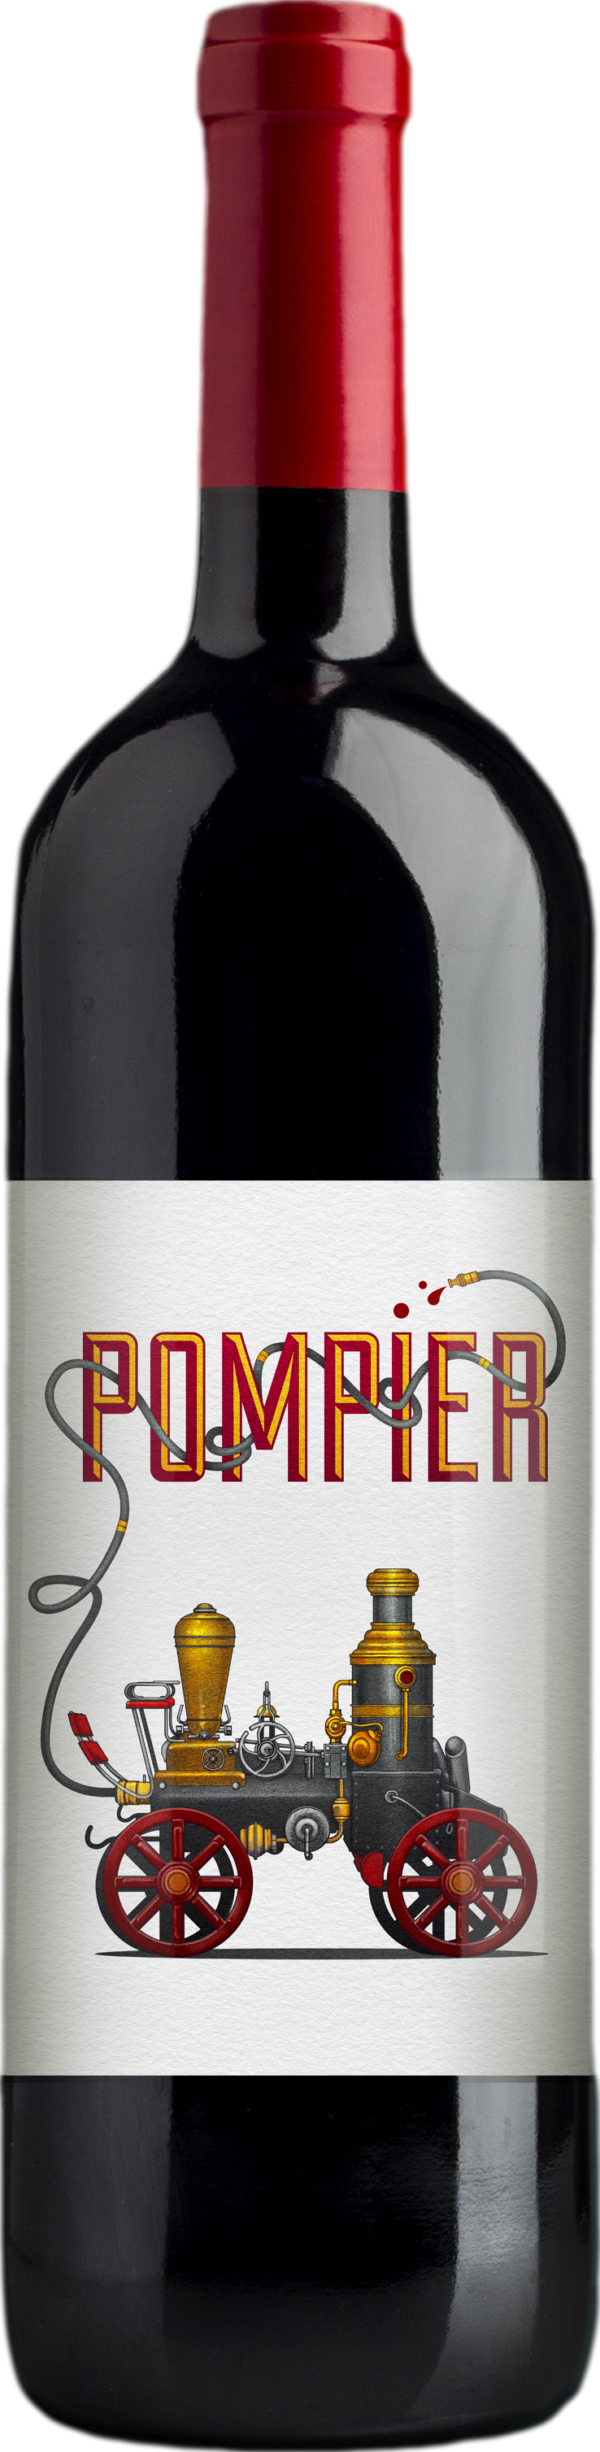 Product image of Domaine Pertuisane Pompier 2020 from 8wines